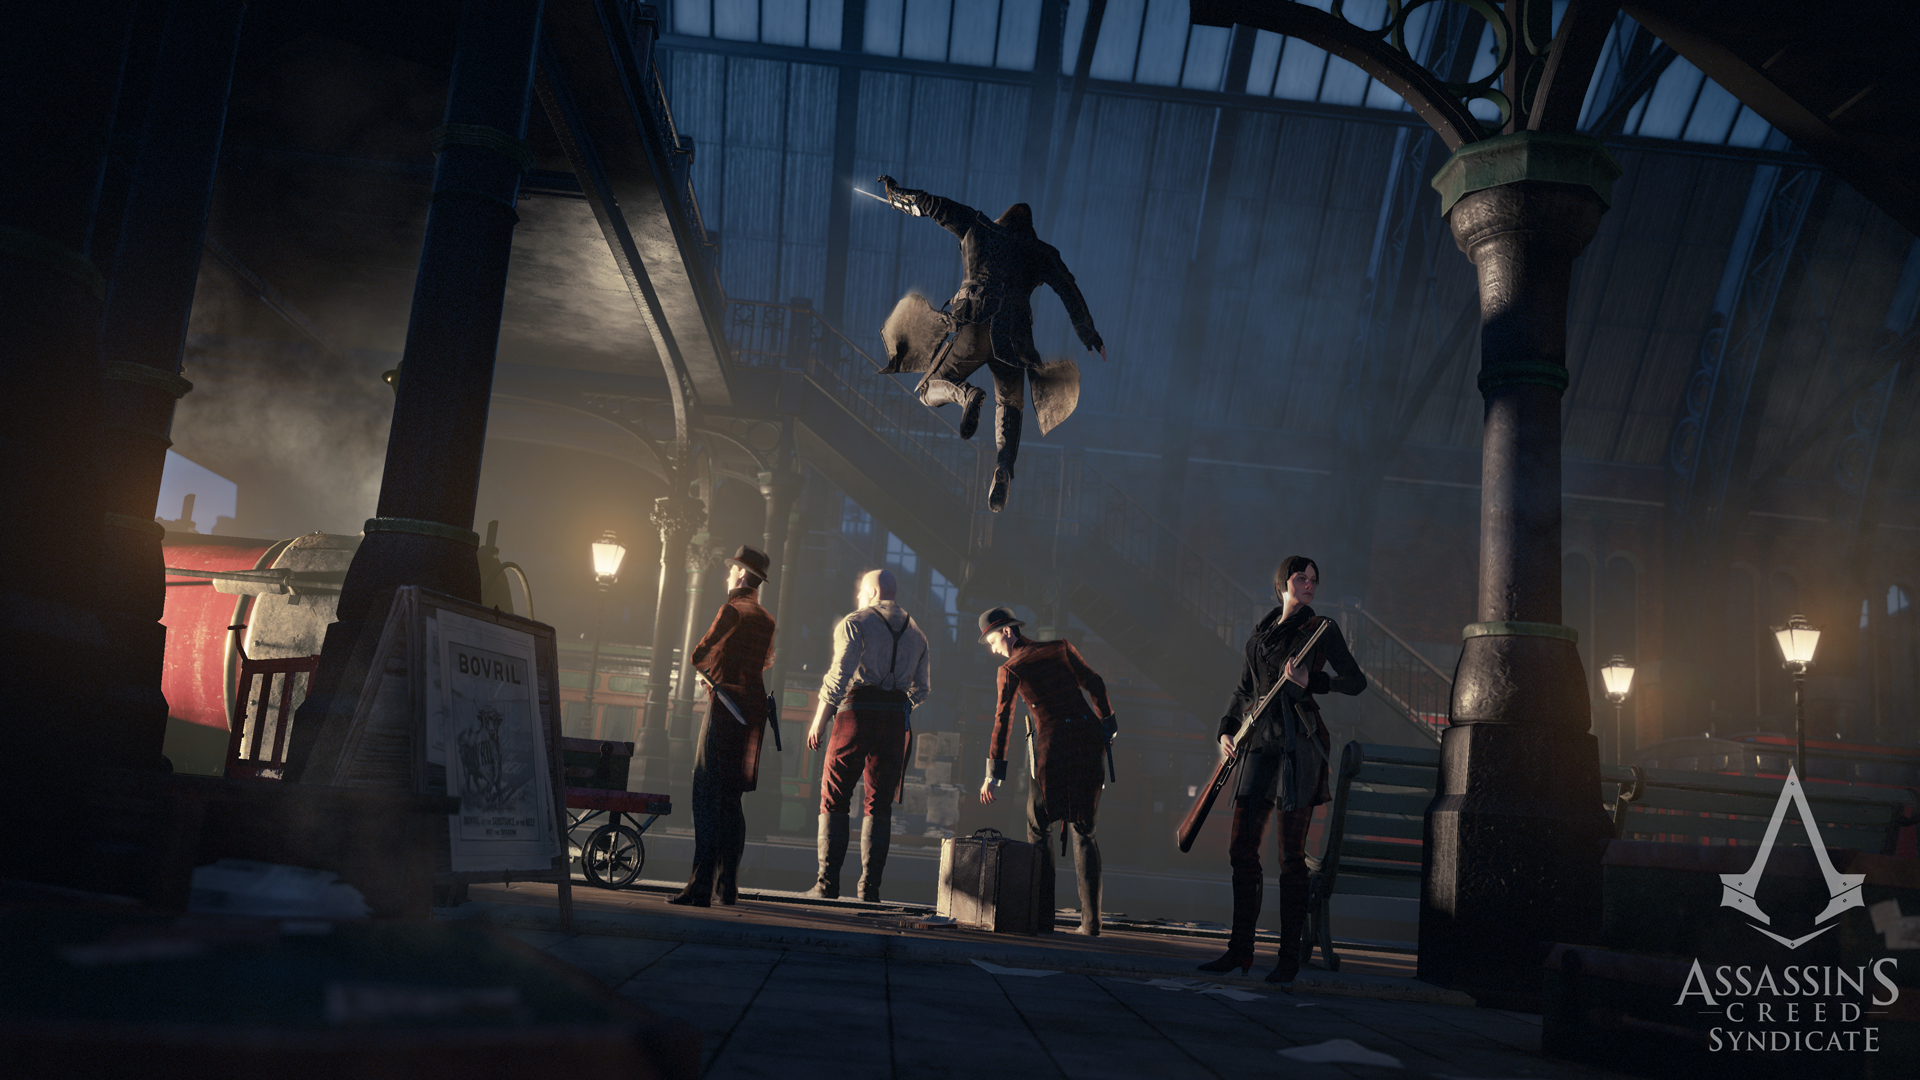 Assassin's Creed: Syndicate Wallpaper